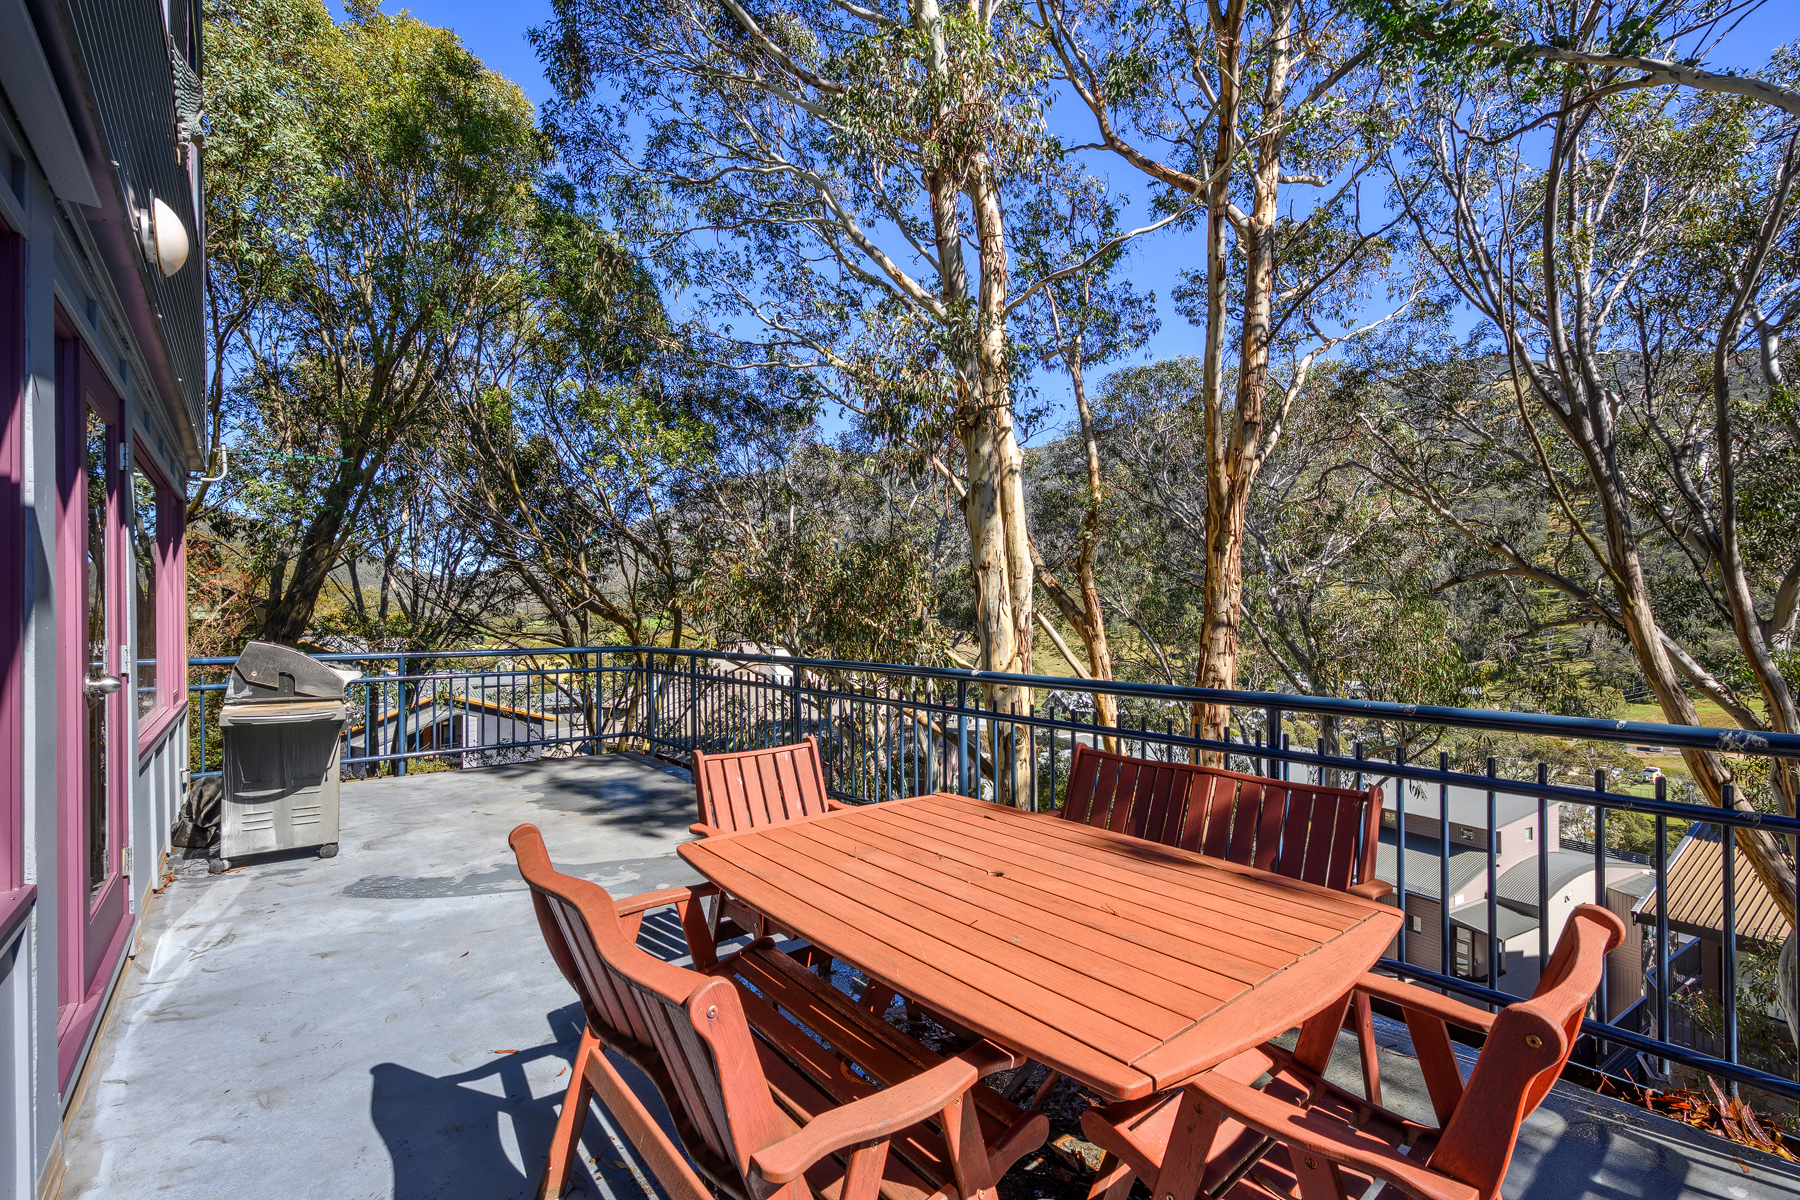 Stunning 3 Bedroom Apartment with Gorgeous Mountain Views in Central Village – Price:  $989,000